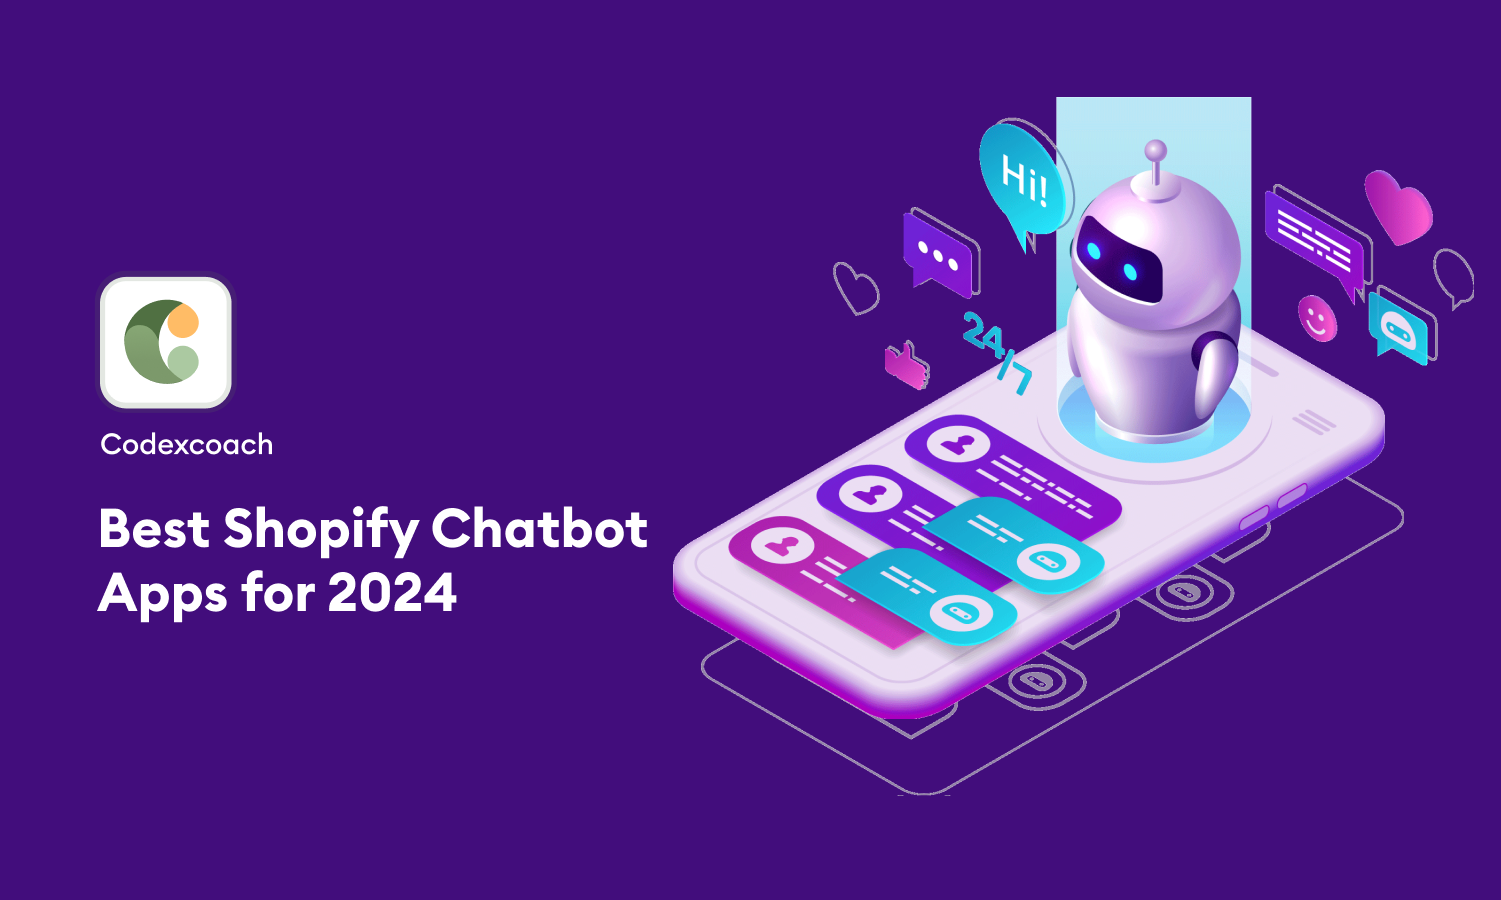 Best Shopify Chatbot Apps for 2024